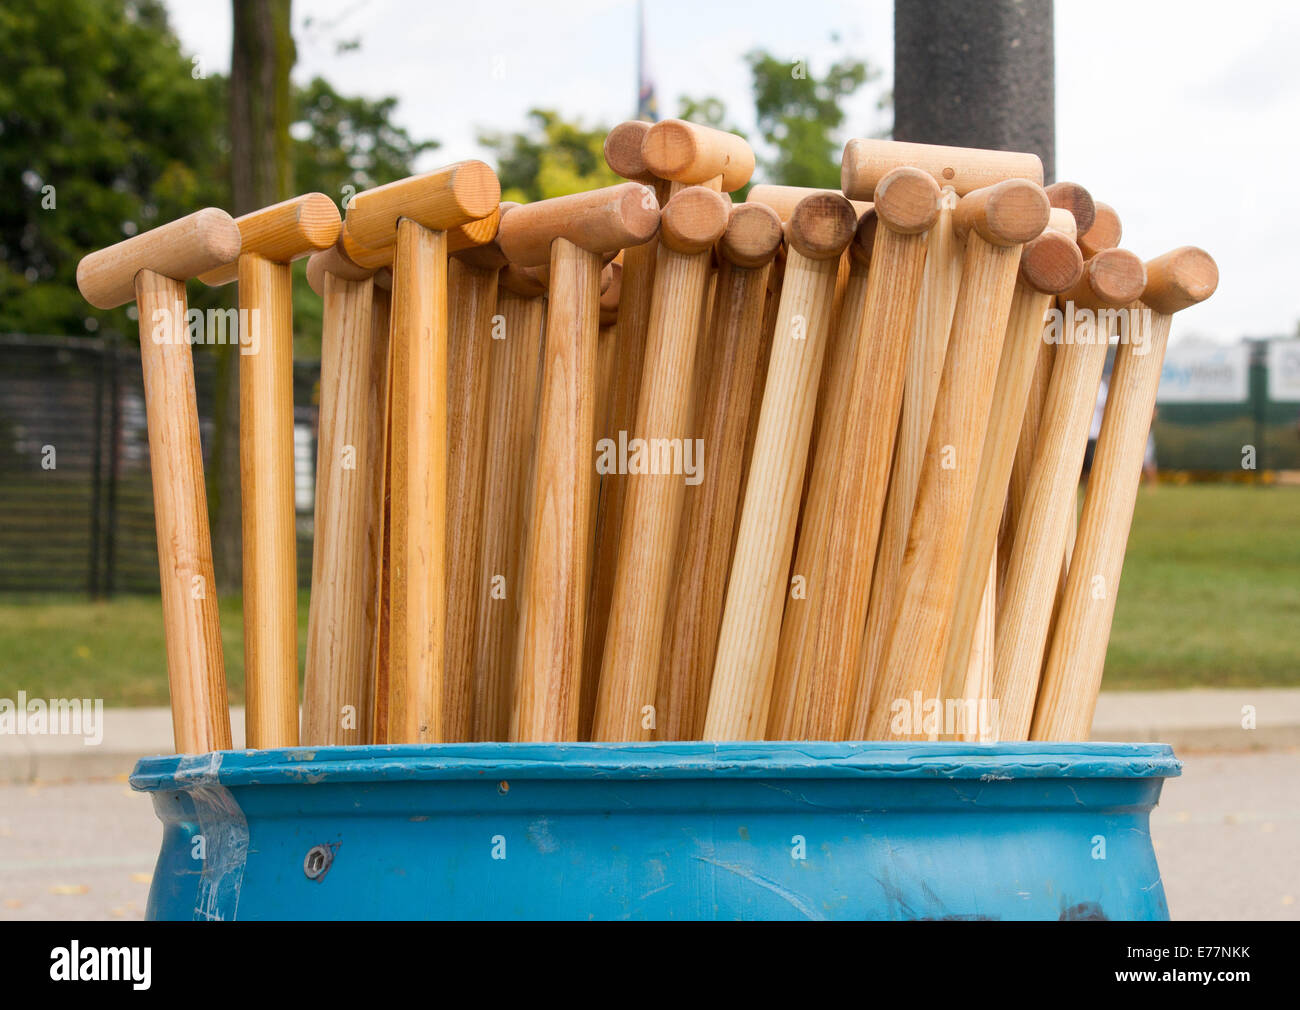 Tub of rowing oars for Dragon Boats Stock Photo